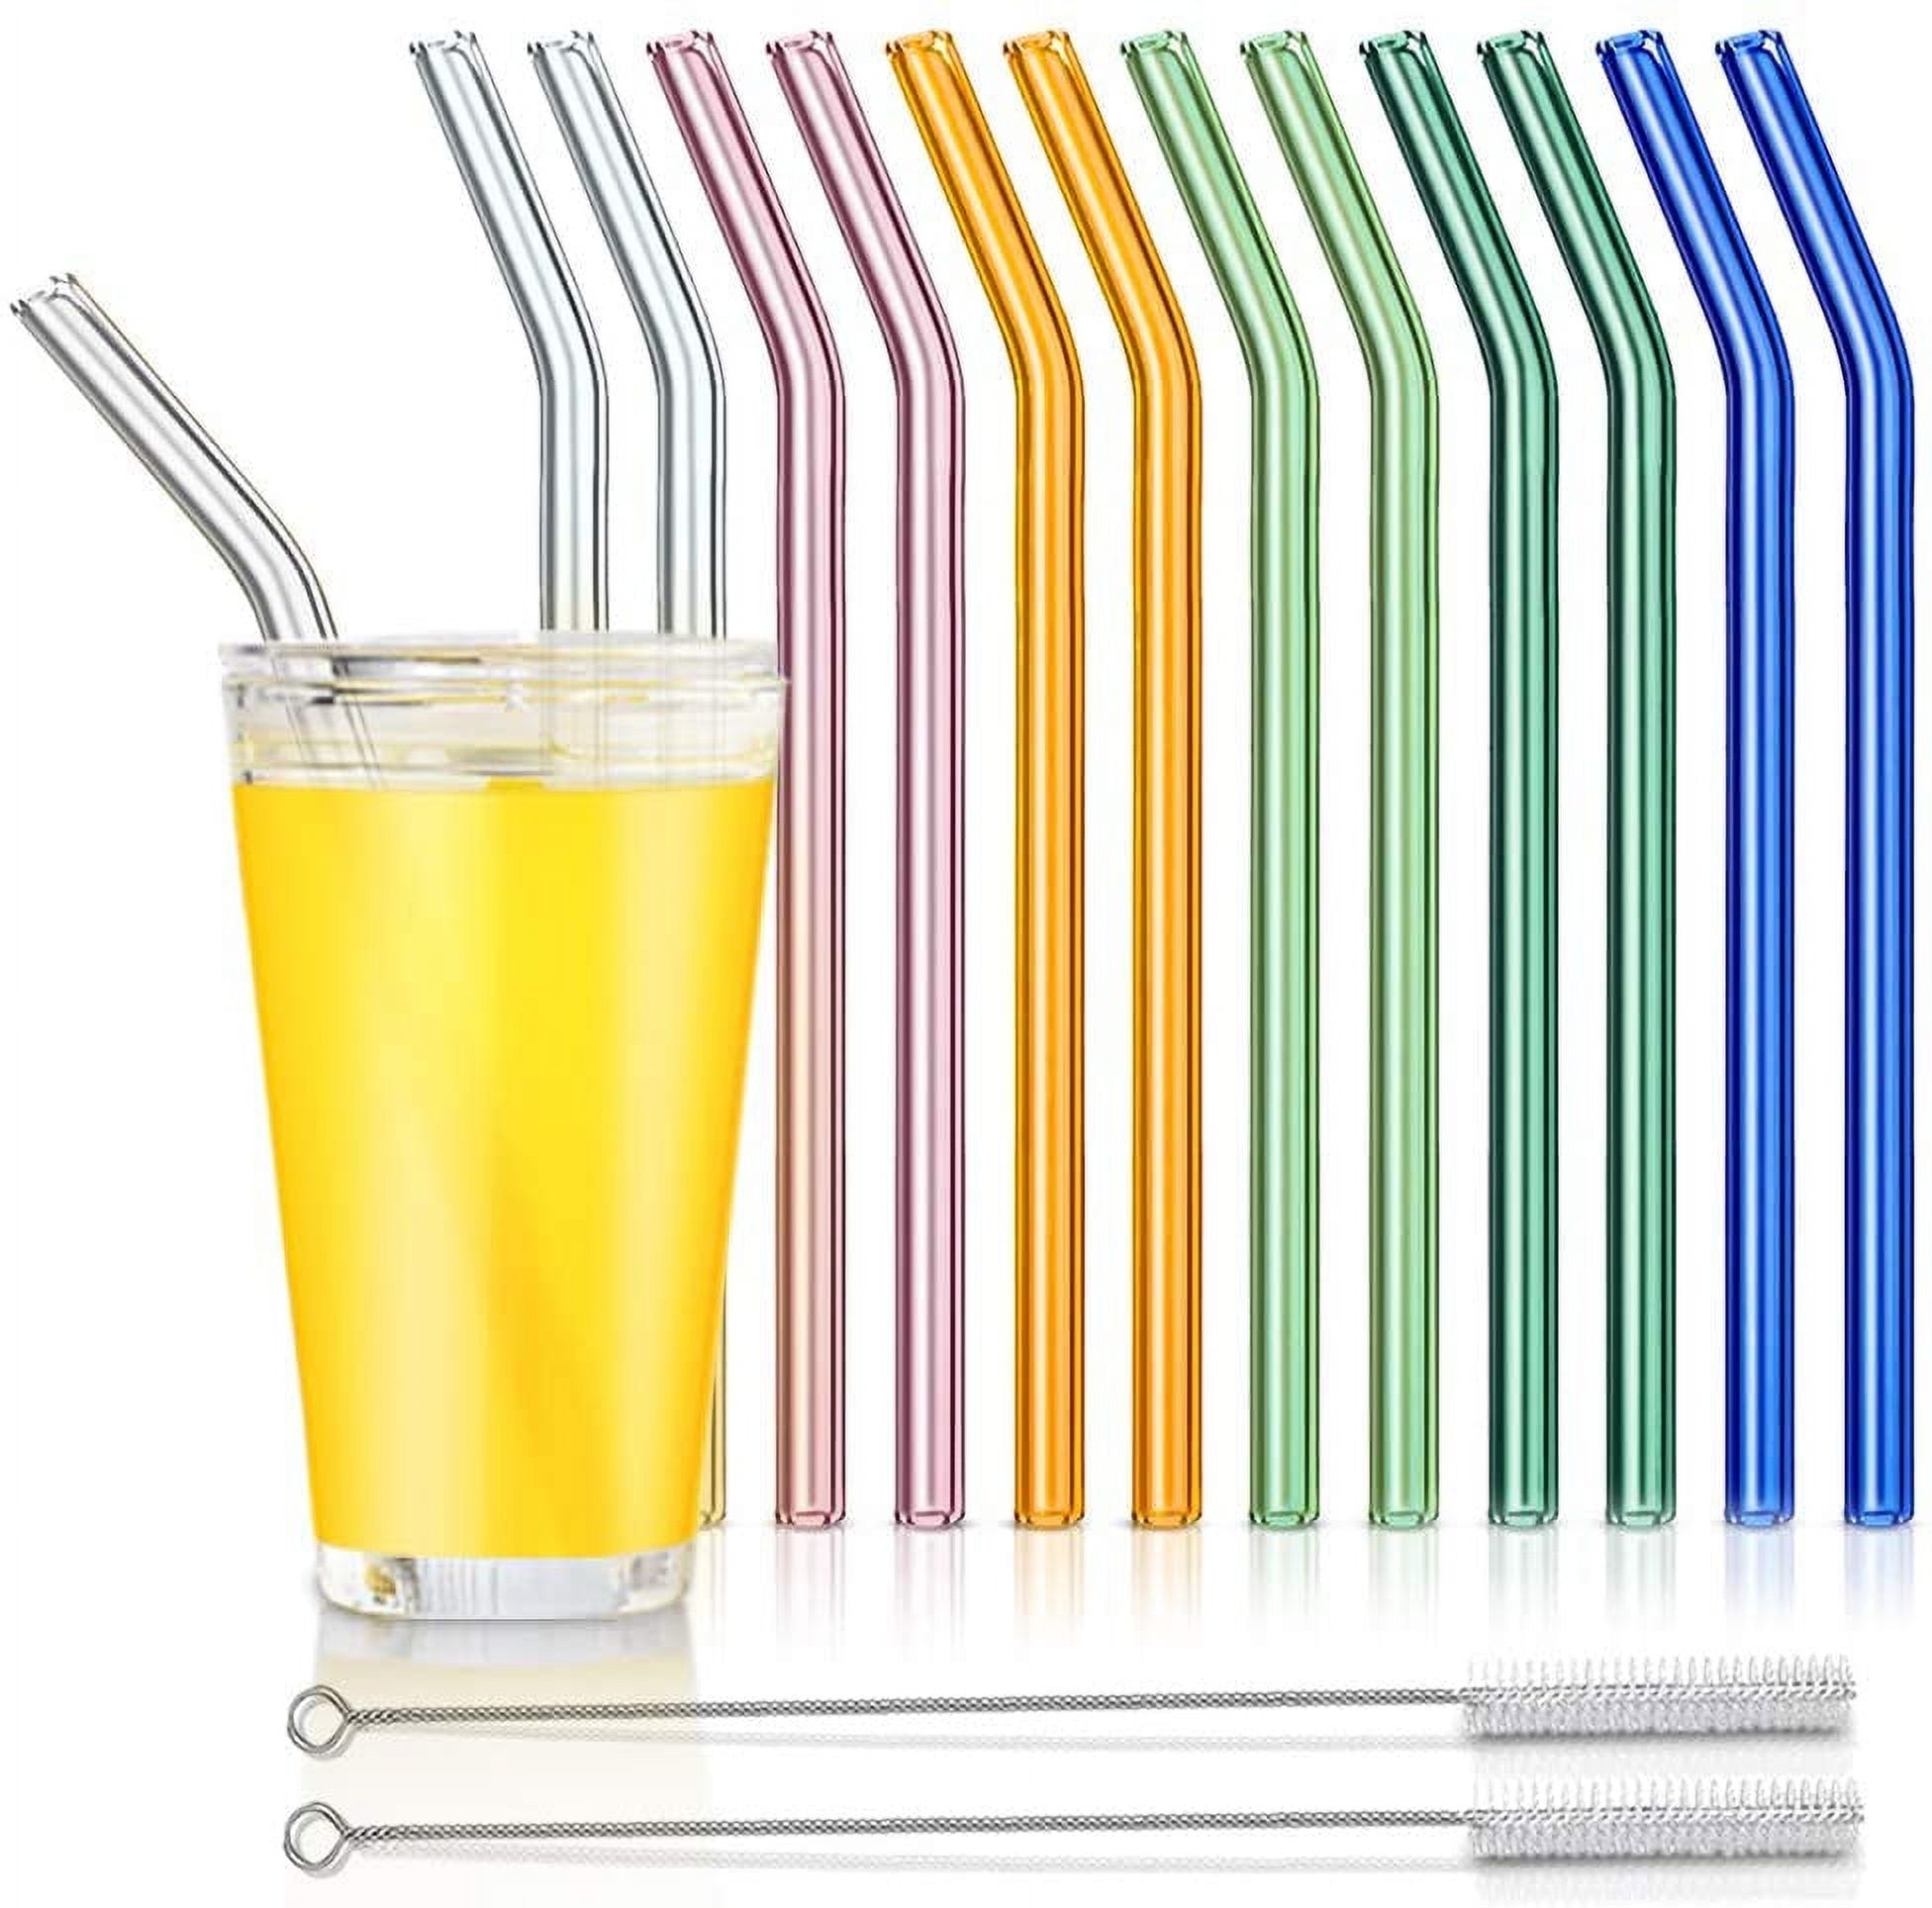 Chainplus 12PCS Glass Drinking Straws, Straight 8 inches x 8mm